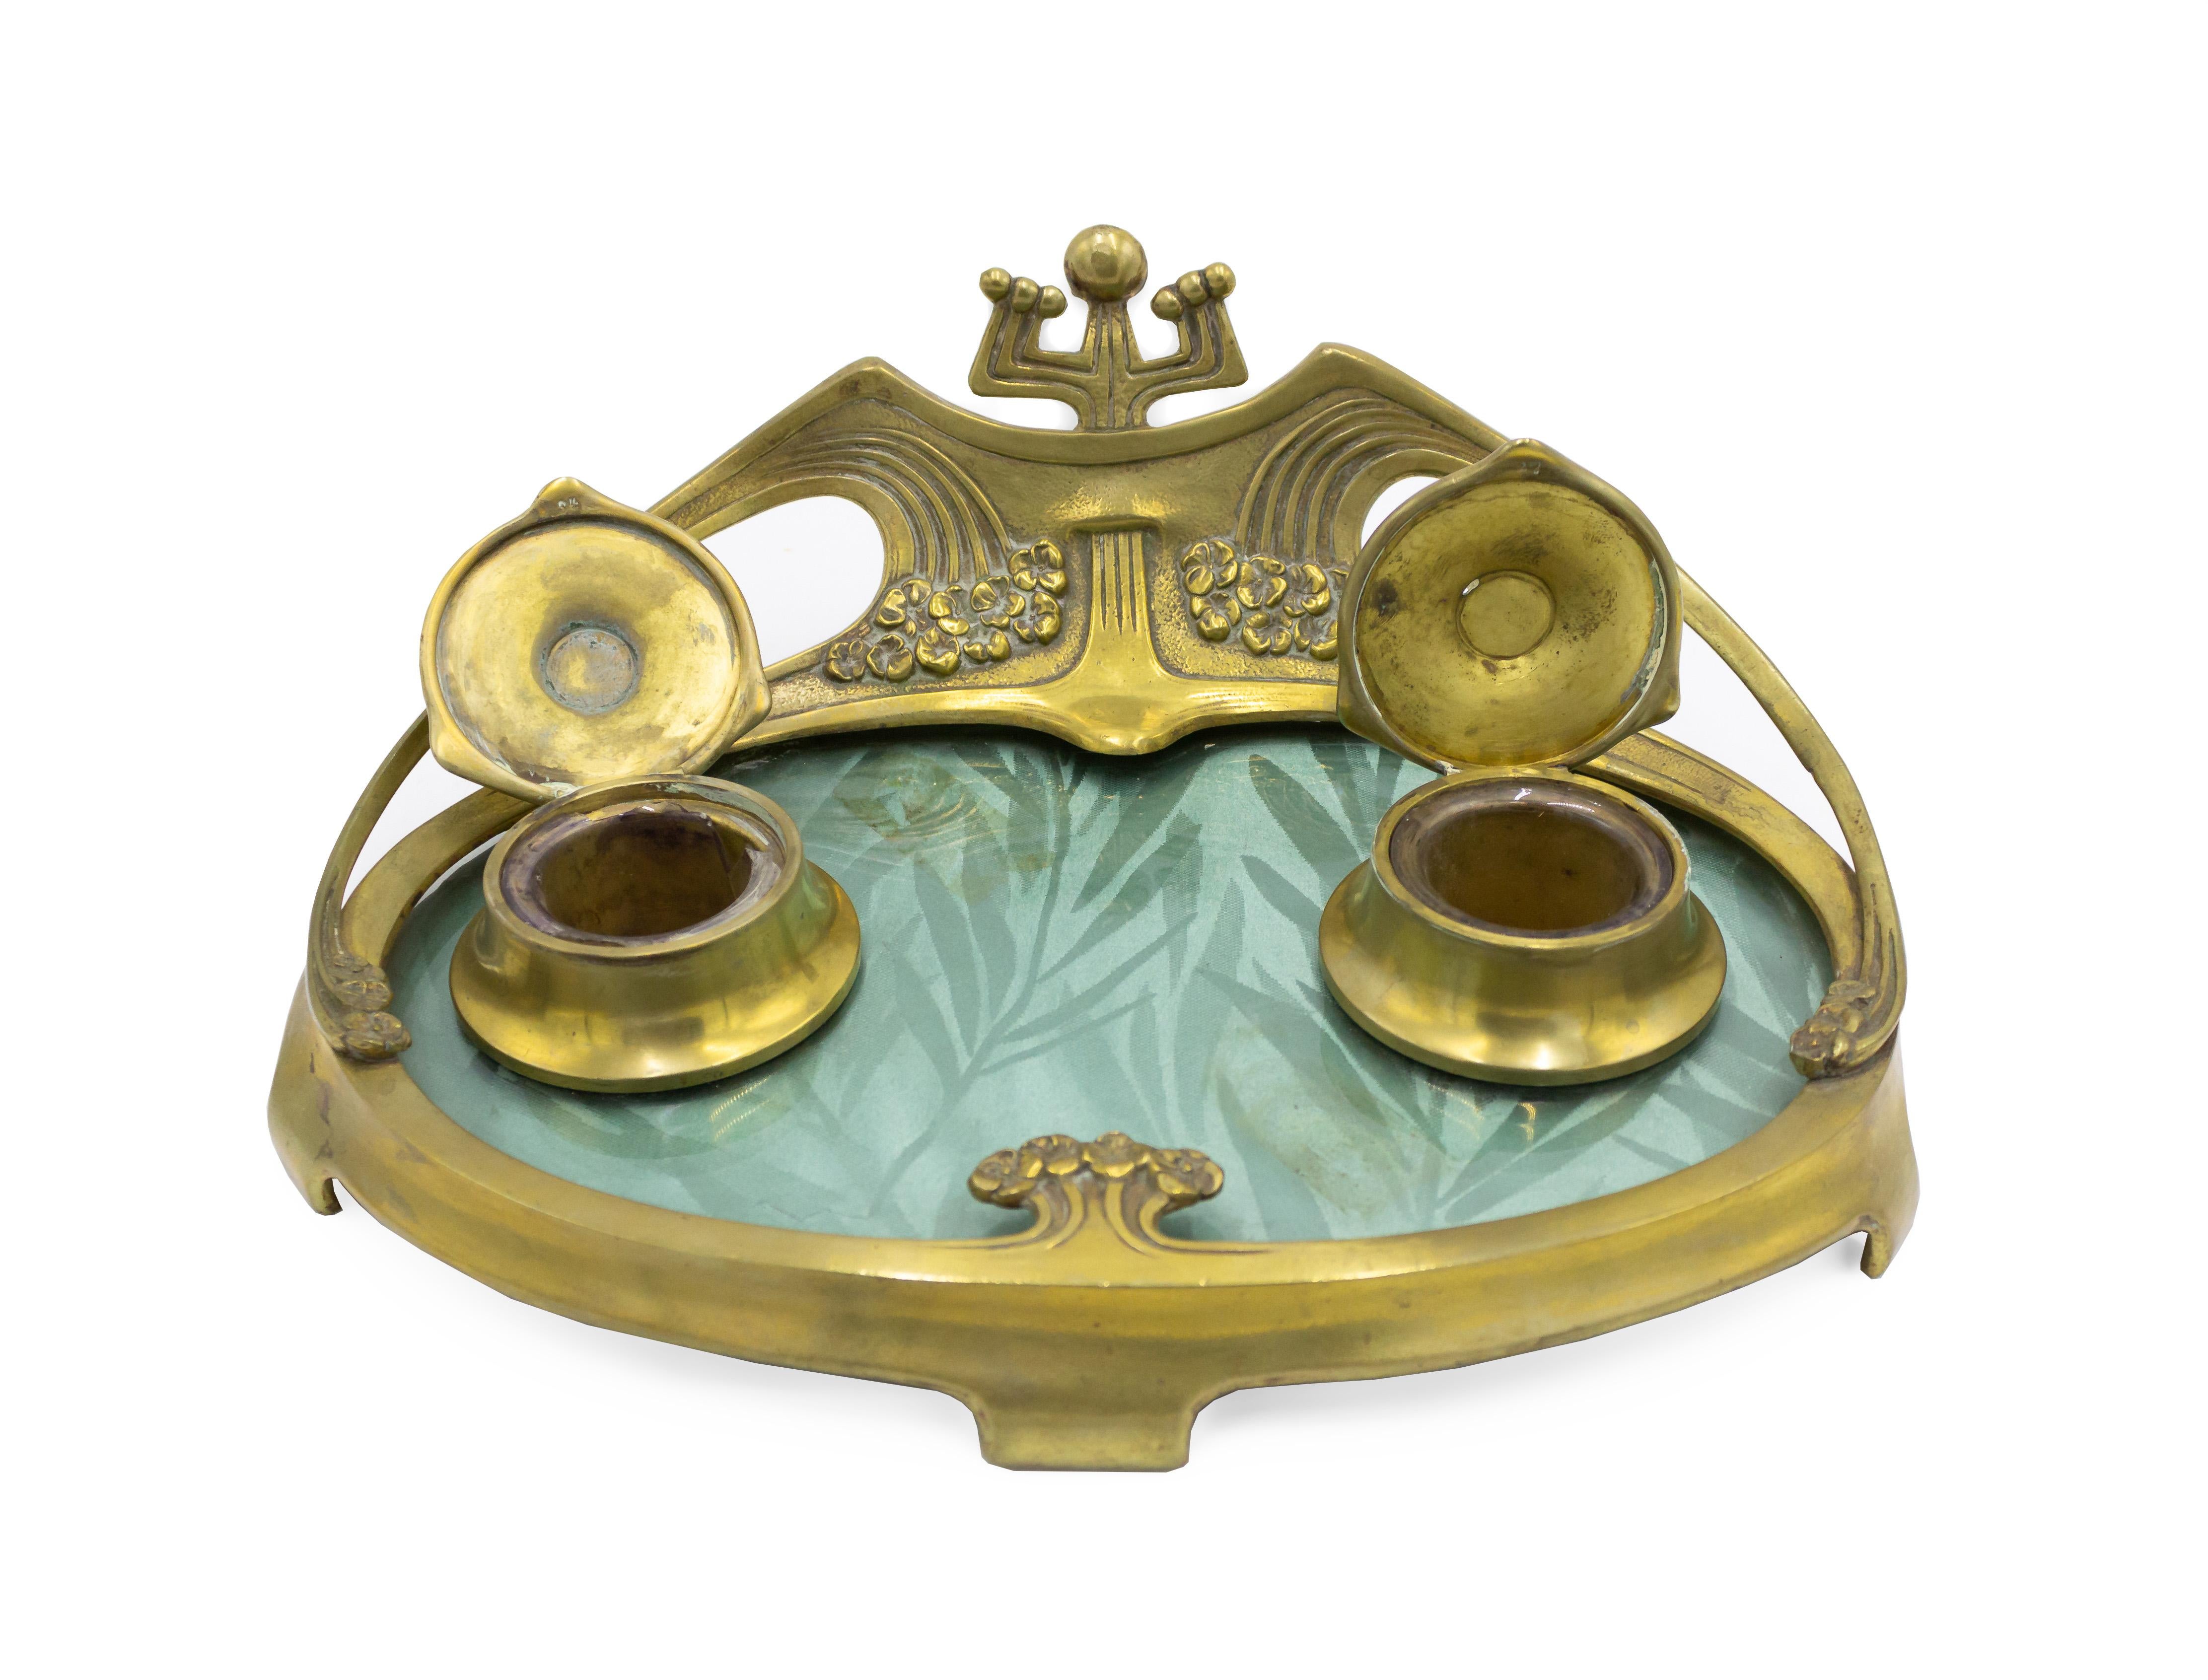 20th Century French Art Nouveau Bronze Dore Inkwell For Sale